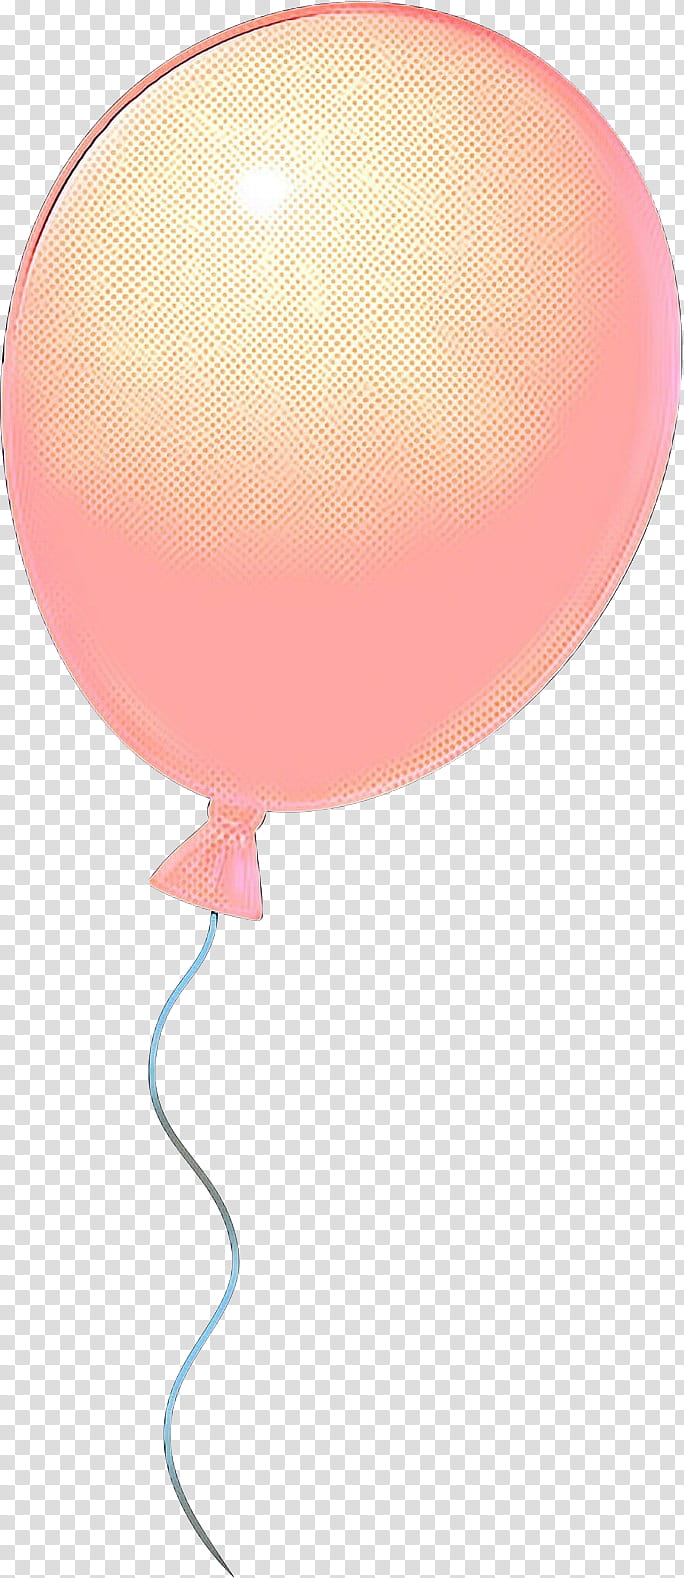 Pink Balloon, Pop Art, Retro, Vintage, Pink M, Lighting, Party Supply, Toy transparent background PNG clipart